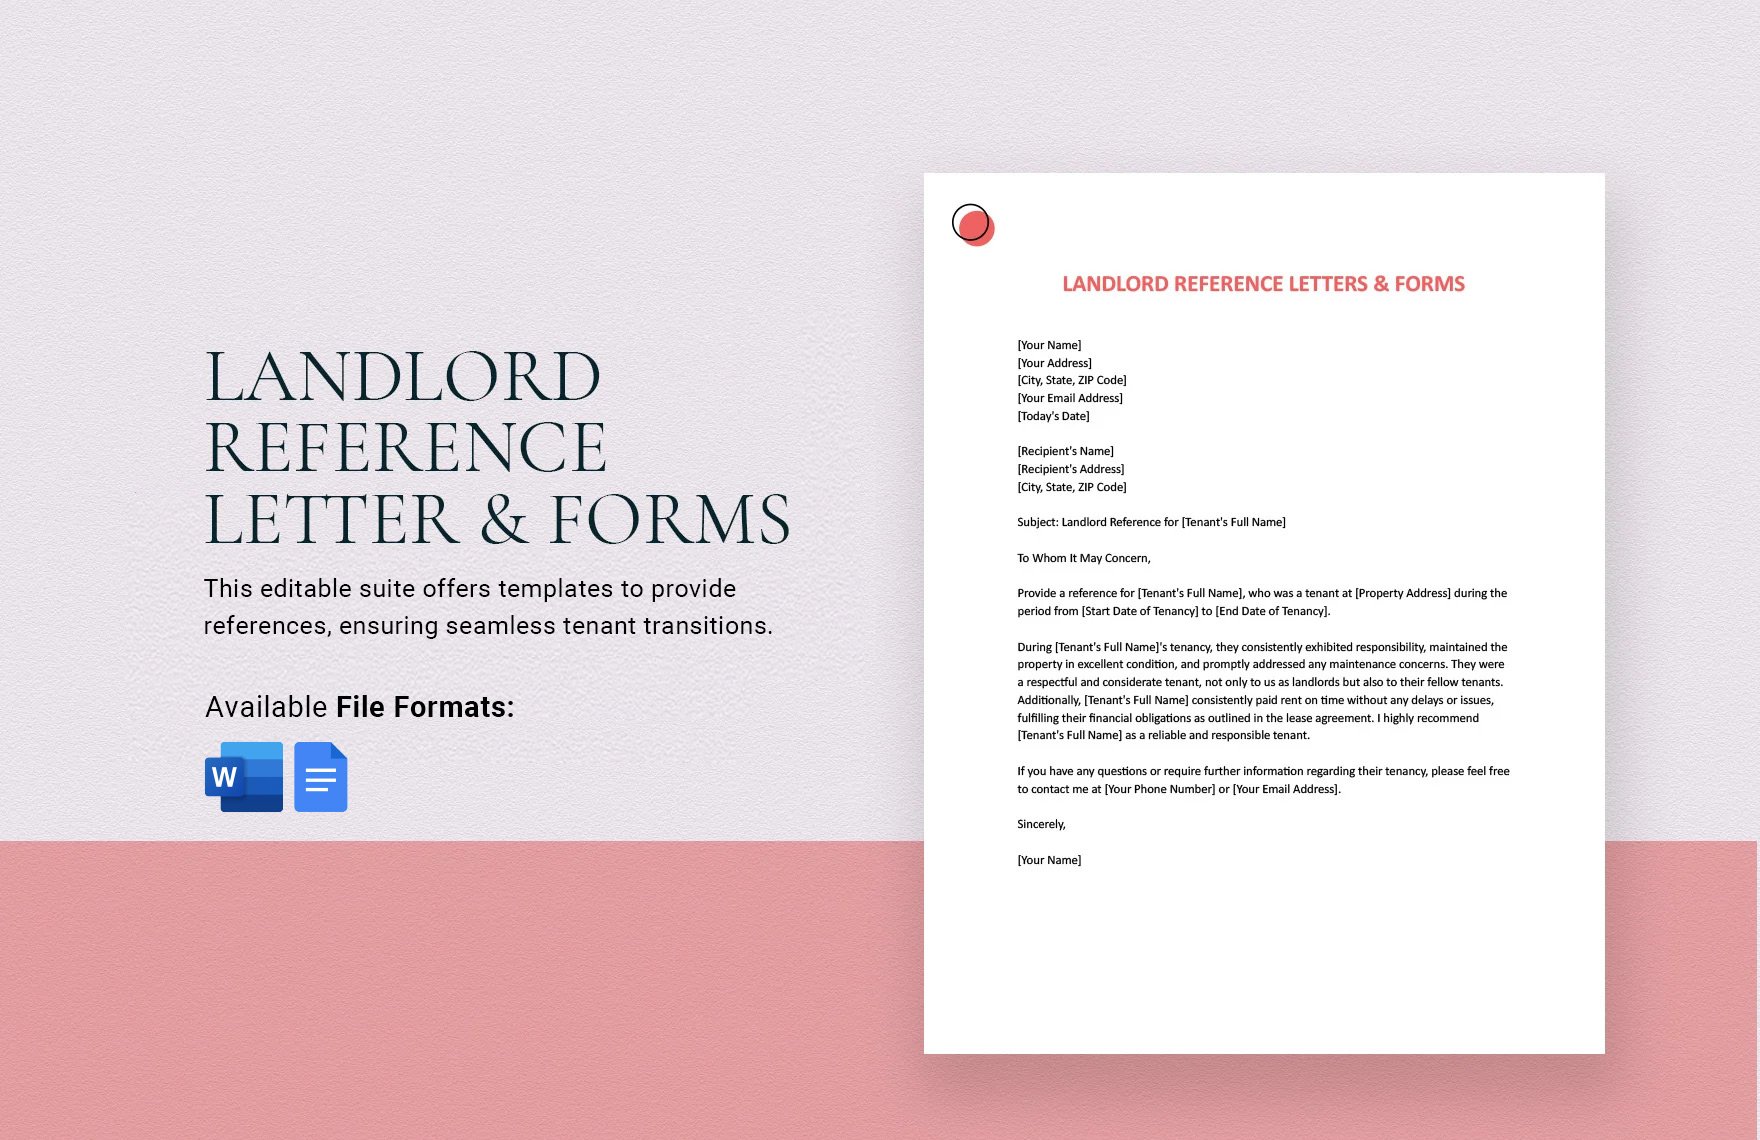 Landlord Reference Letters & Forms in Word, Google Docs